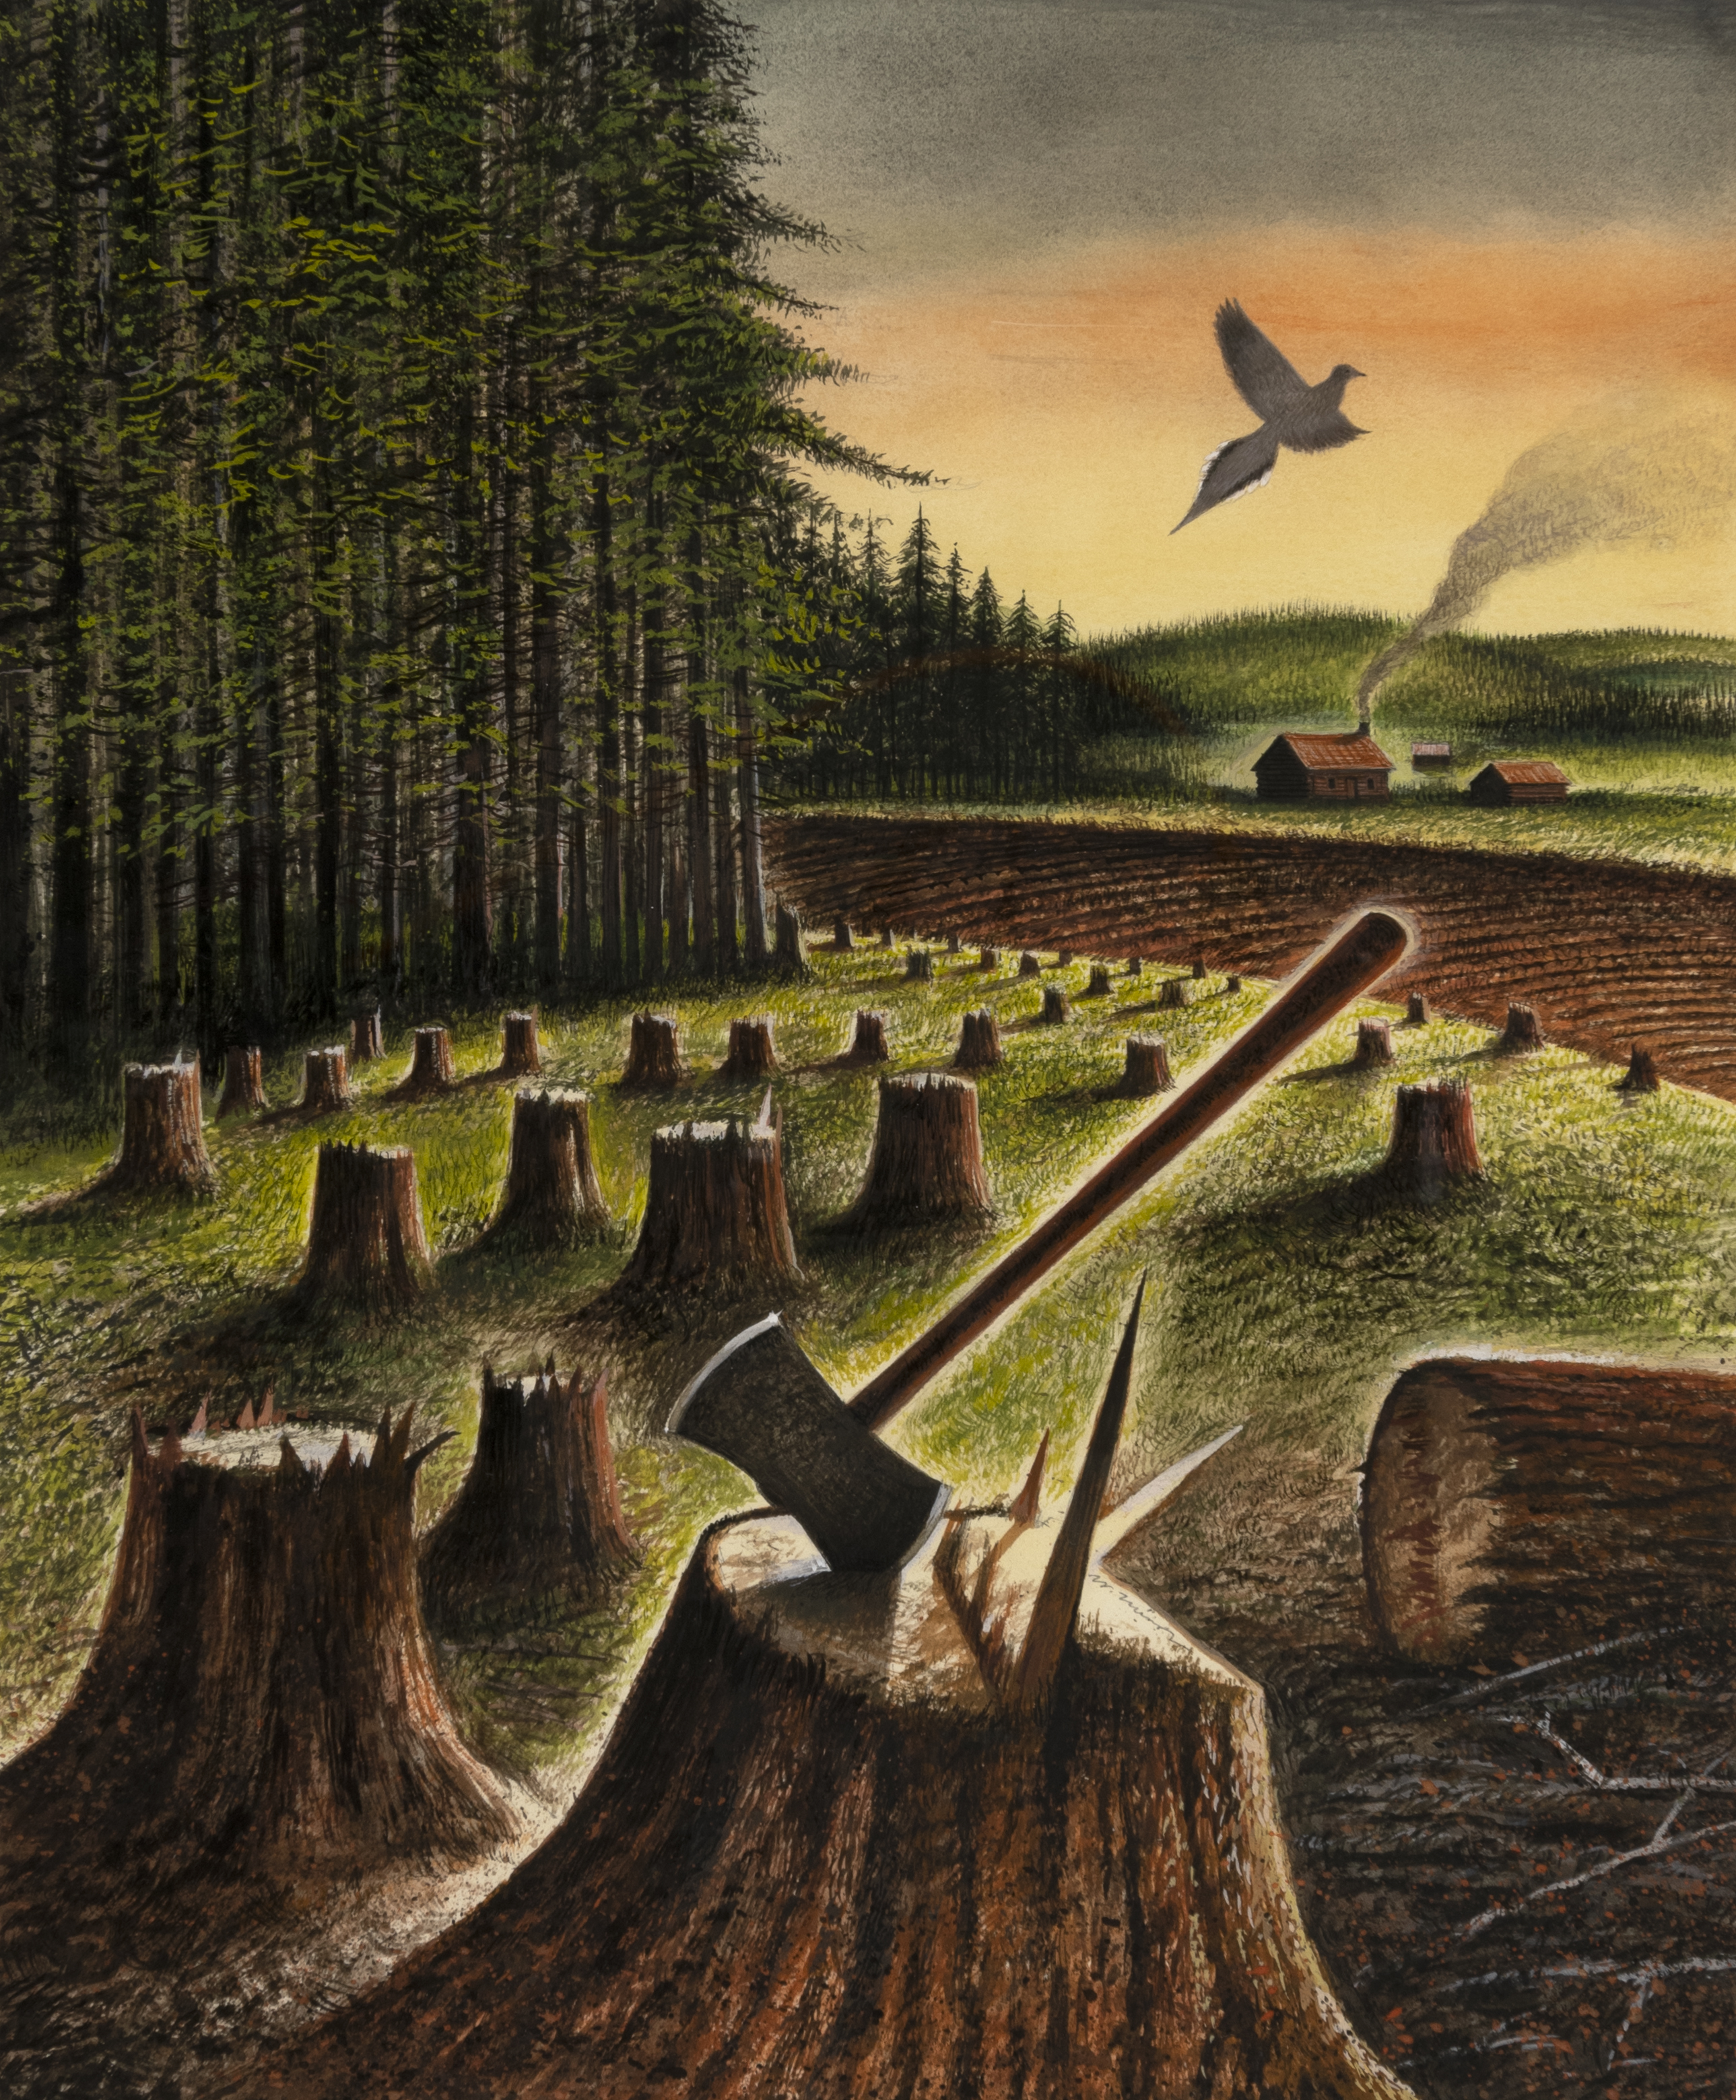 A landscape showing several tree stumps in the forgreground; one stump has a large shard of wood protruding from it, and an axe stuck in it. The background shows tall trees, and a bird flying away.